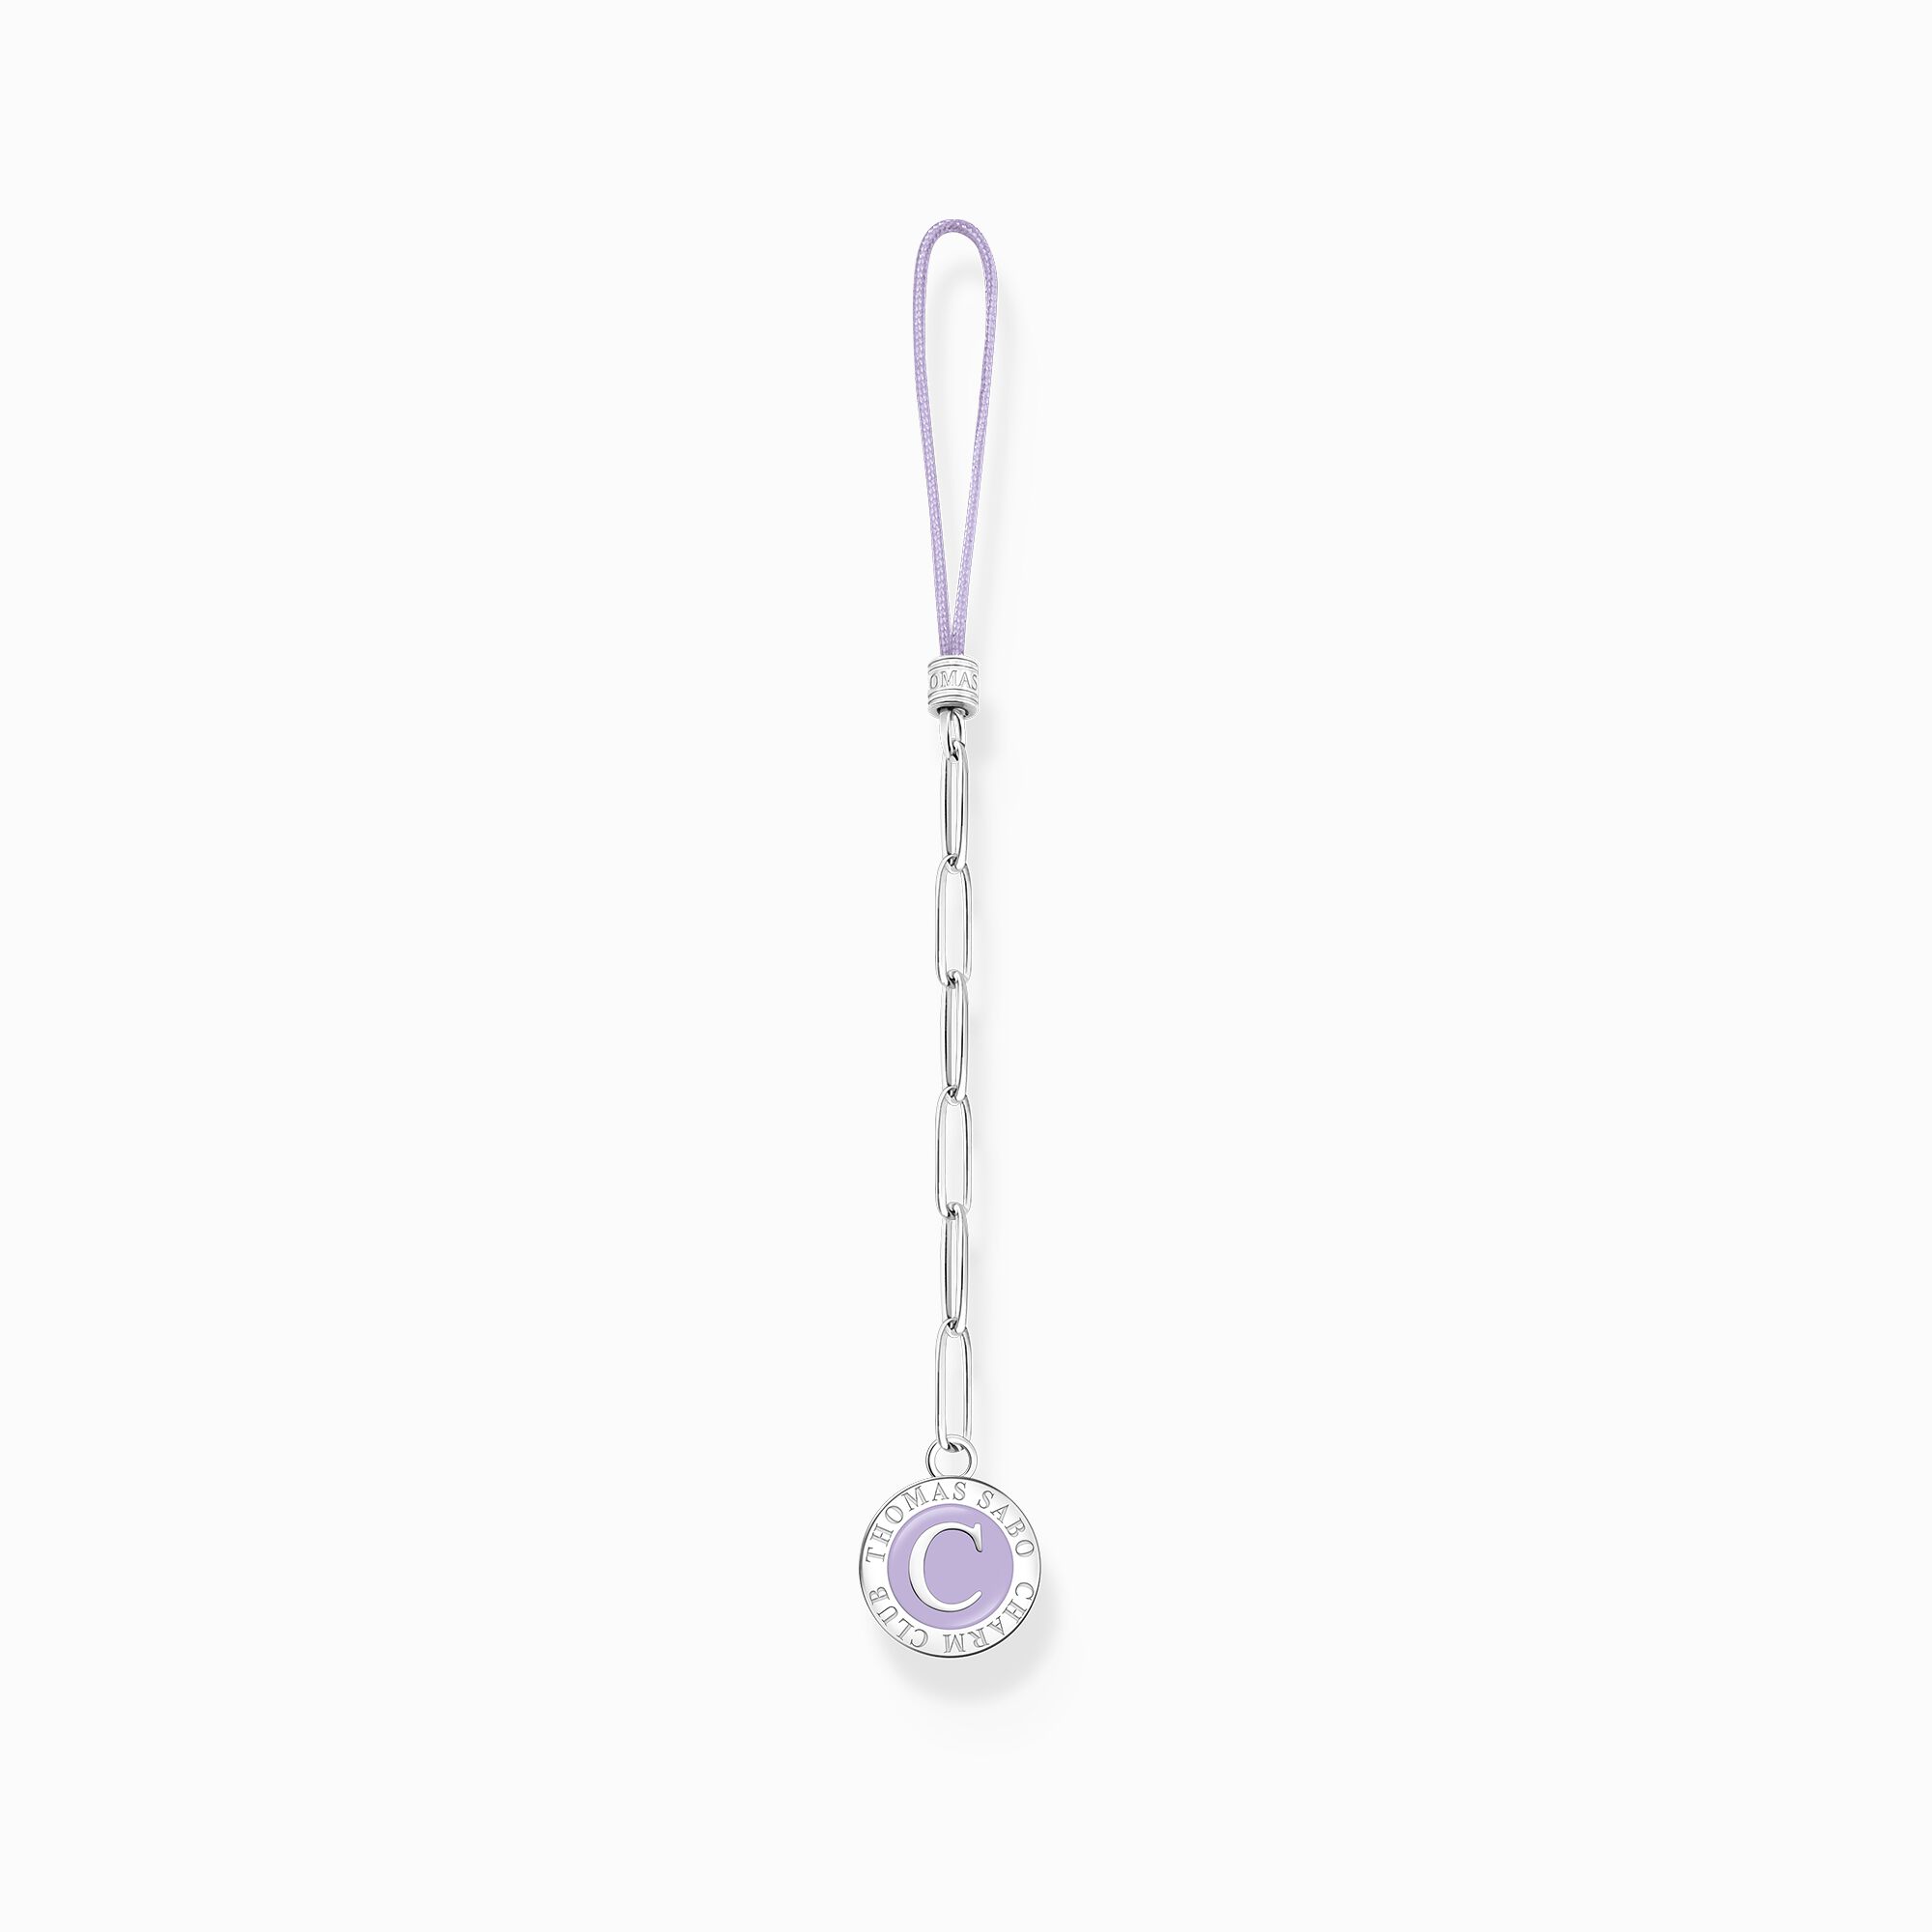 Silver Charm Club mobile chain short with Charmista Coin from the Charm Club collection in the THOMAS SABO online store